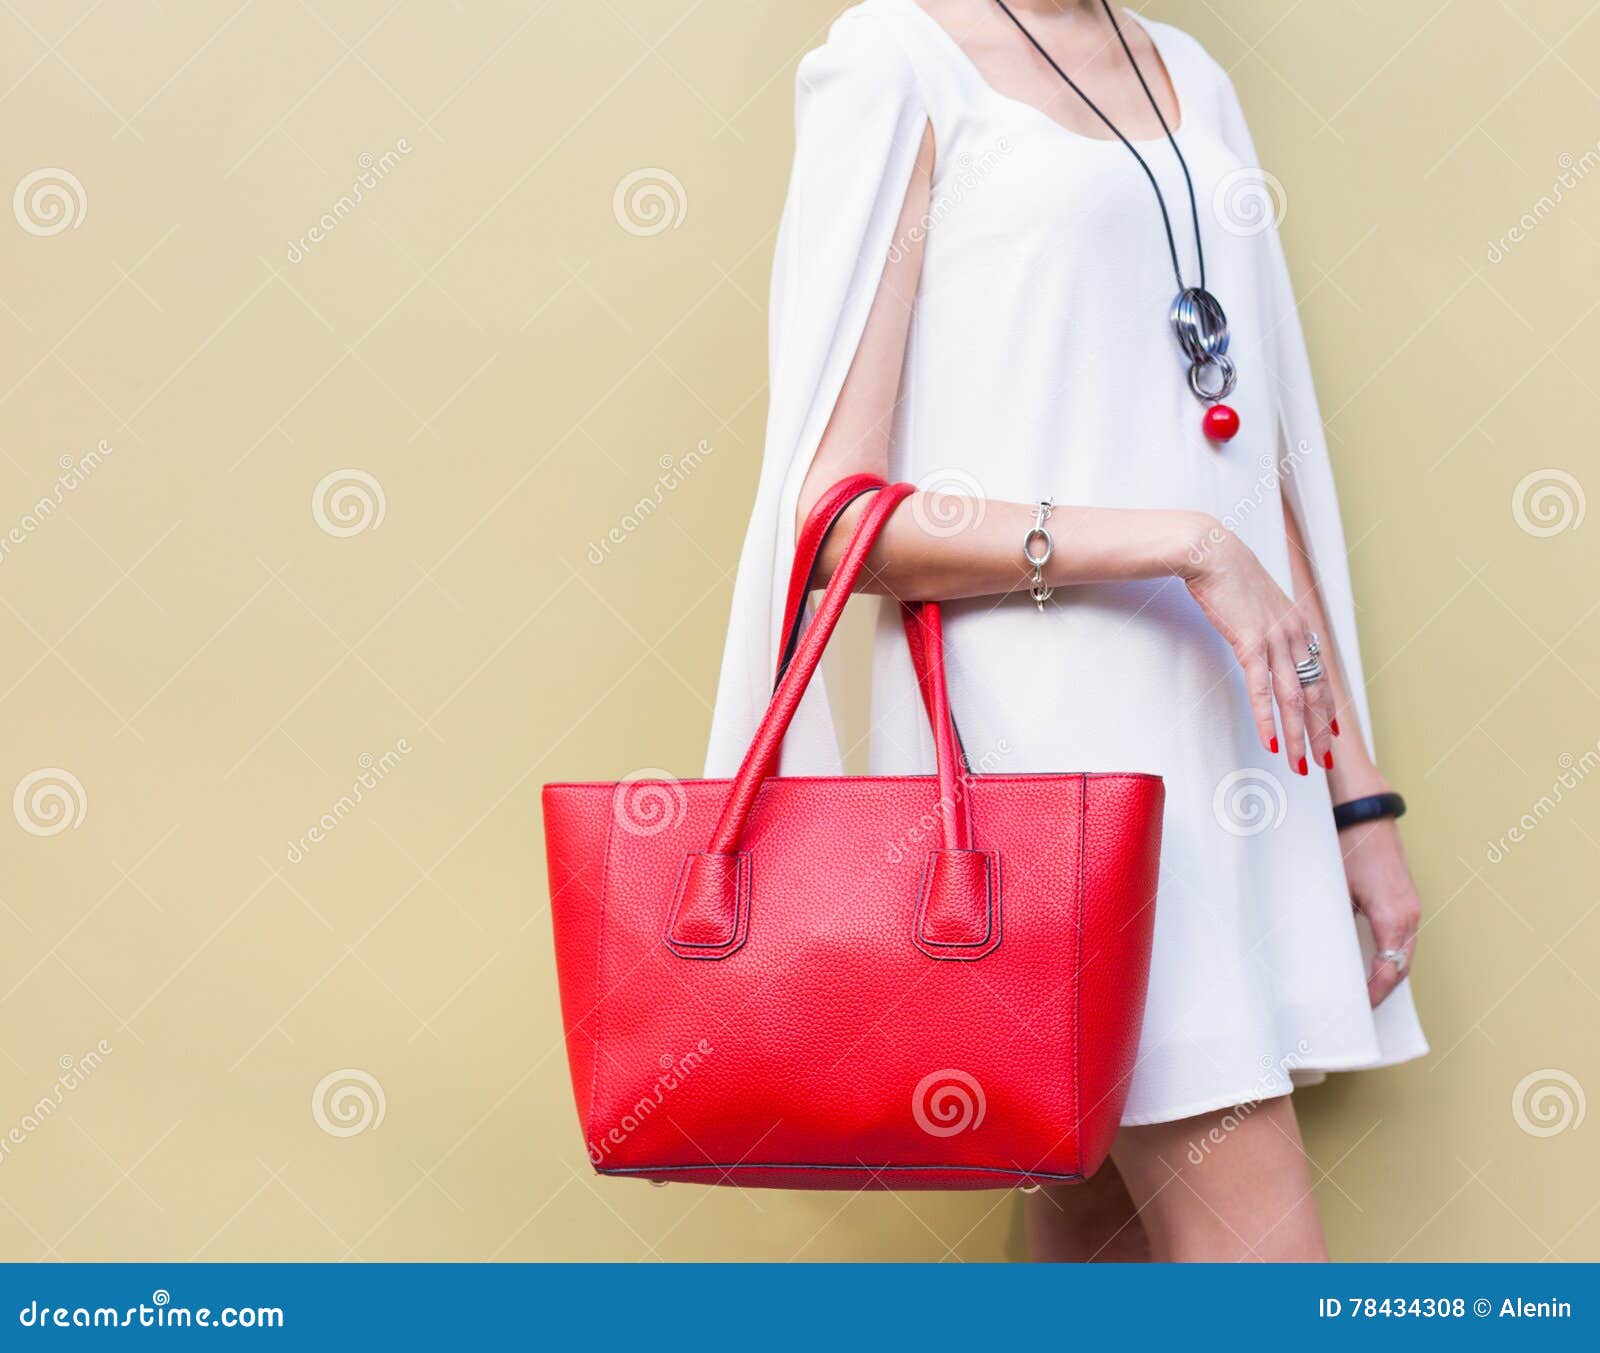 fashionable beautiful big red handbag on the arm of the girl in a fashionable white dress, posing near the wall on a